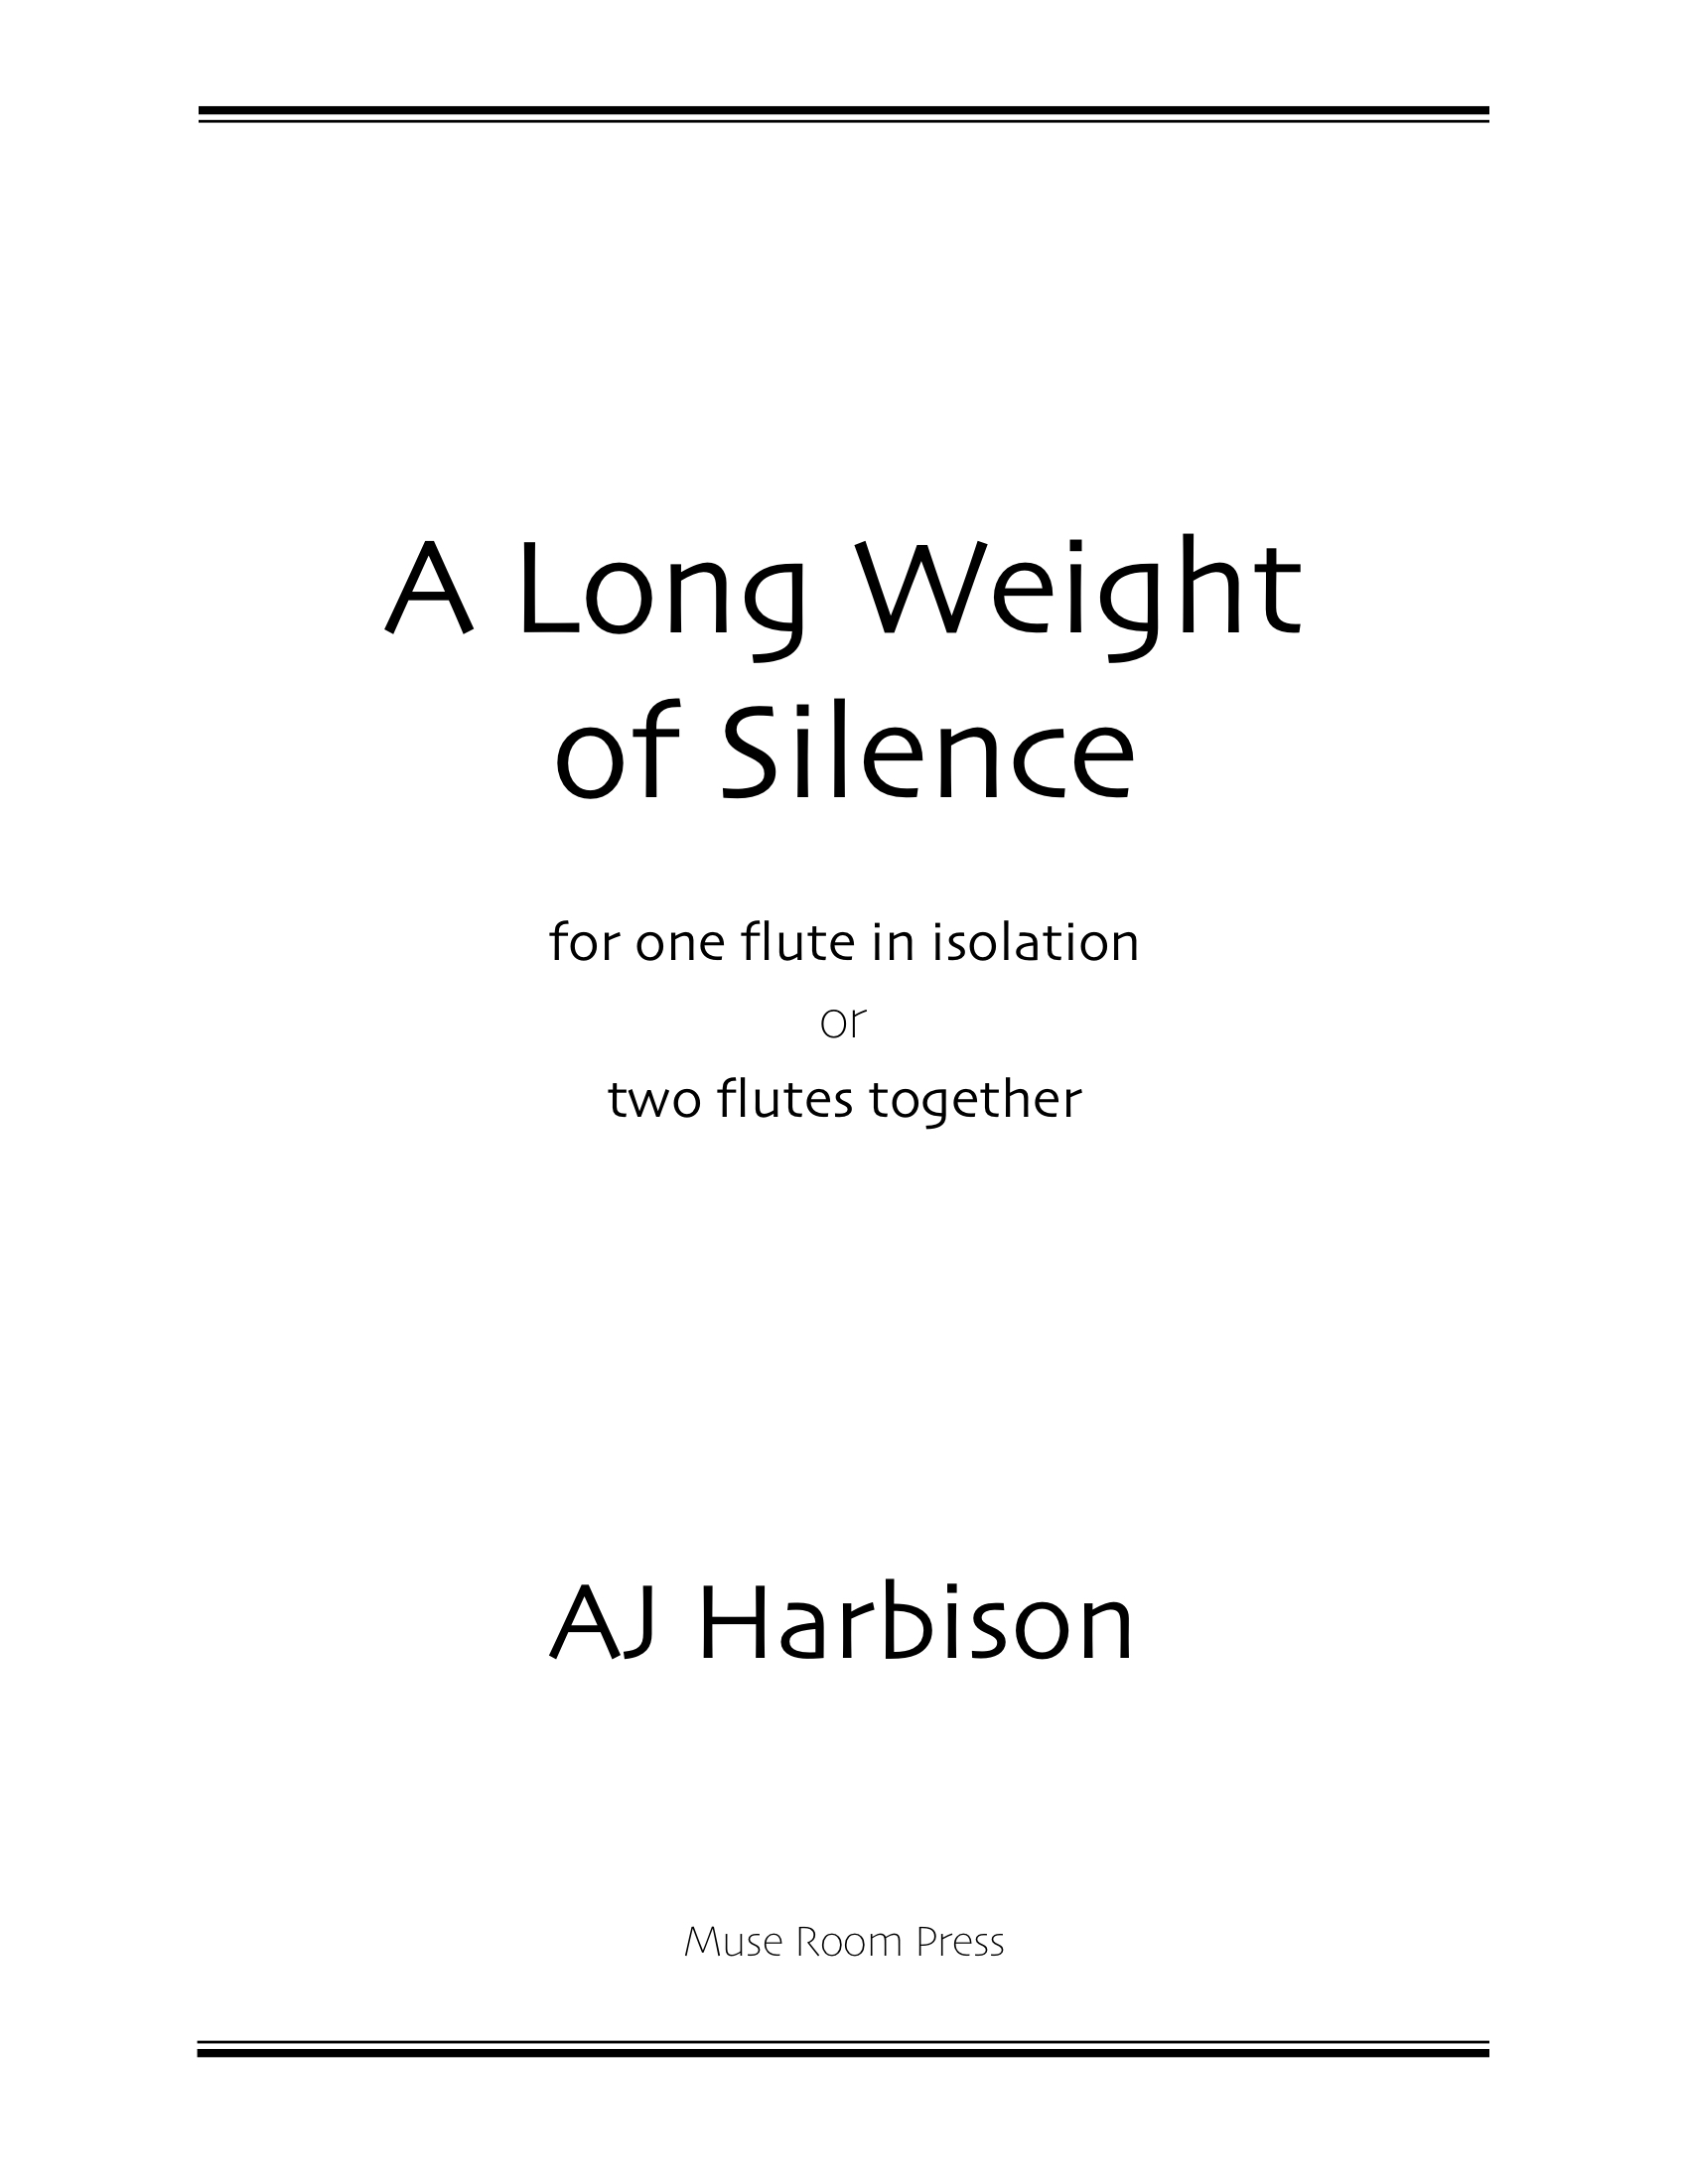 A Long Weight of Silence